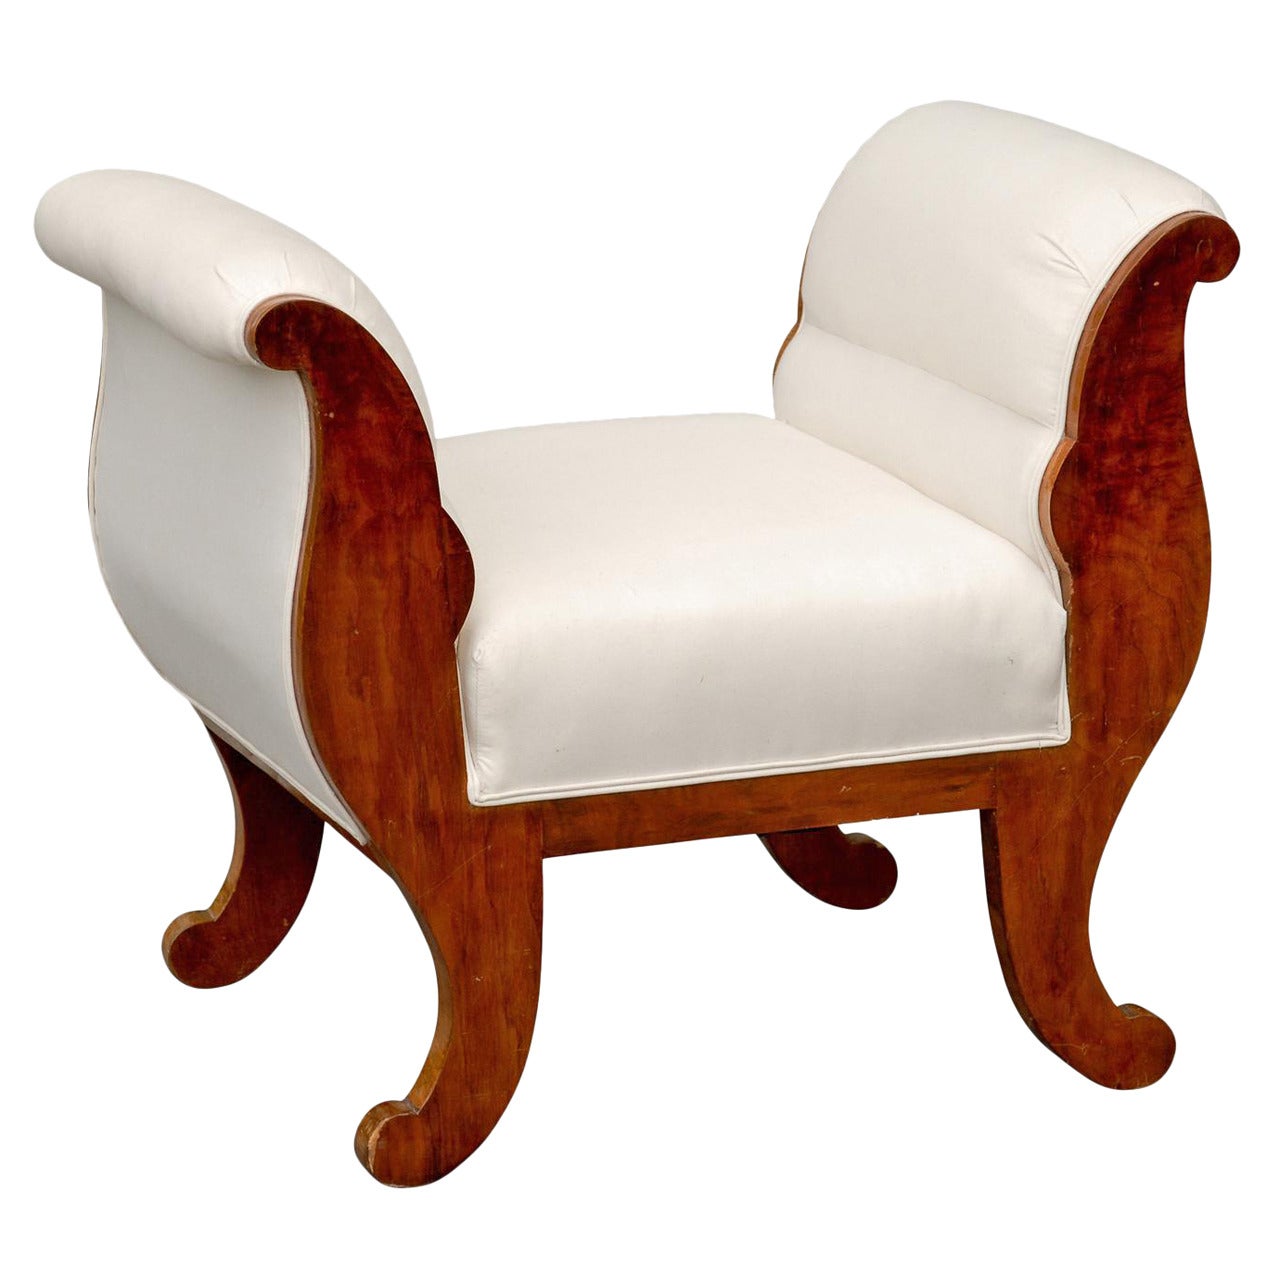 Austrian 1850s Biedermeier Upholstered Stool with Out-Scrolled Arms and Legs